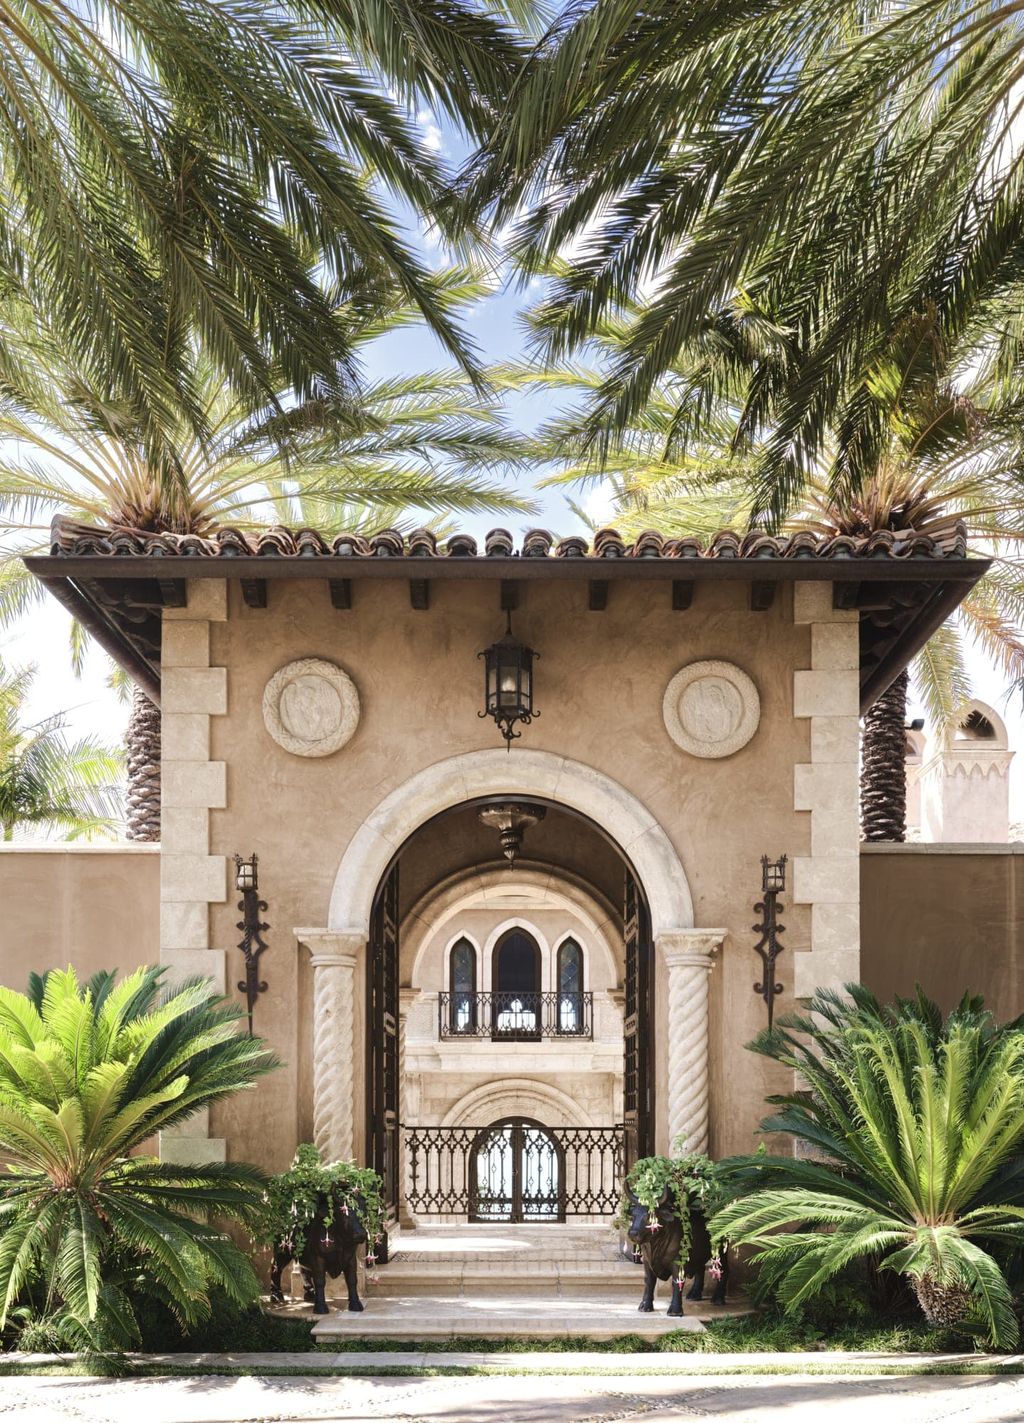 Located in the highly-coveted Malibu, this stunning Italian Palazzo is an icon of the area, sited on a 1.73-acre promontory with breathtaking views from Point Dume to the Santa Monica Pier. The villa features 7 bedrooms, 9 baths, and a spacious living area of 13,126 square feet.